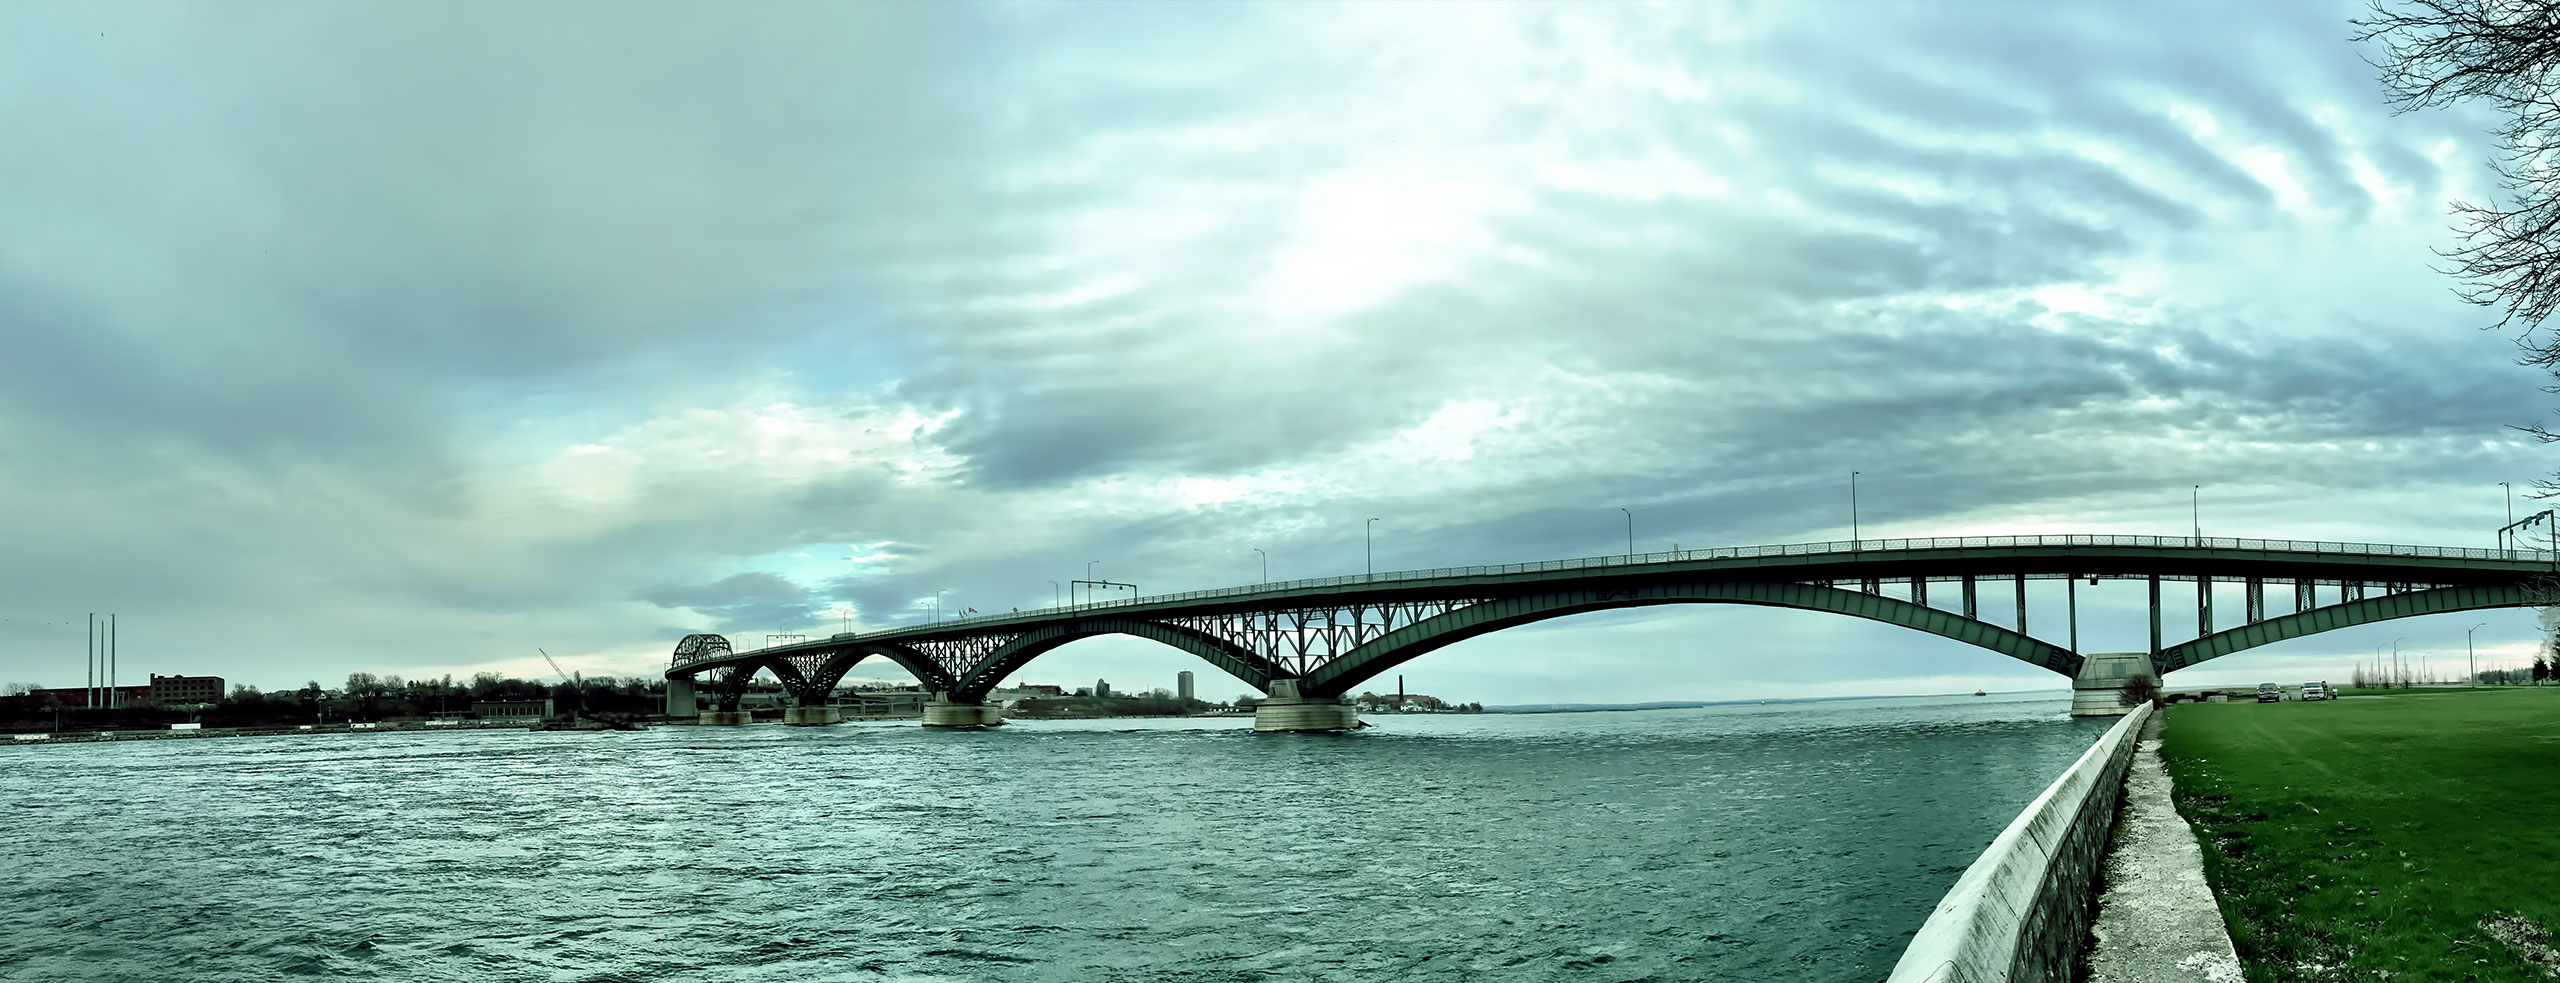 The bridge crossing at Fort Erie, Ontario, Canada on a cloudy day